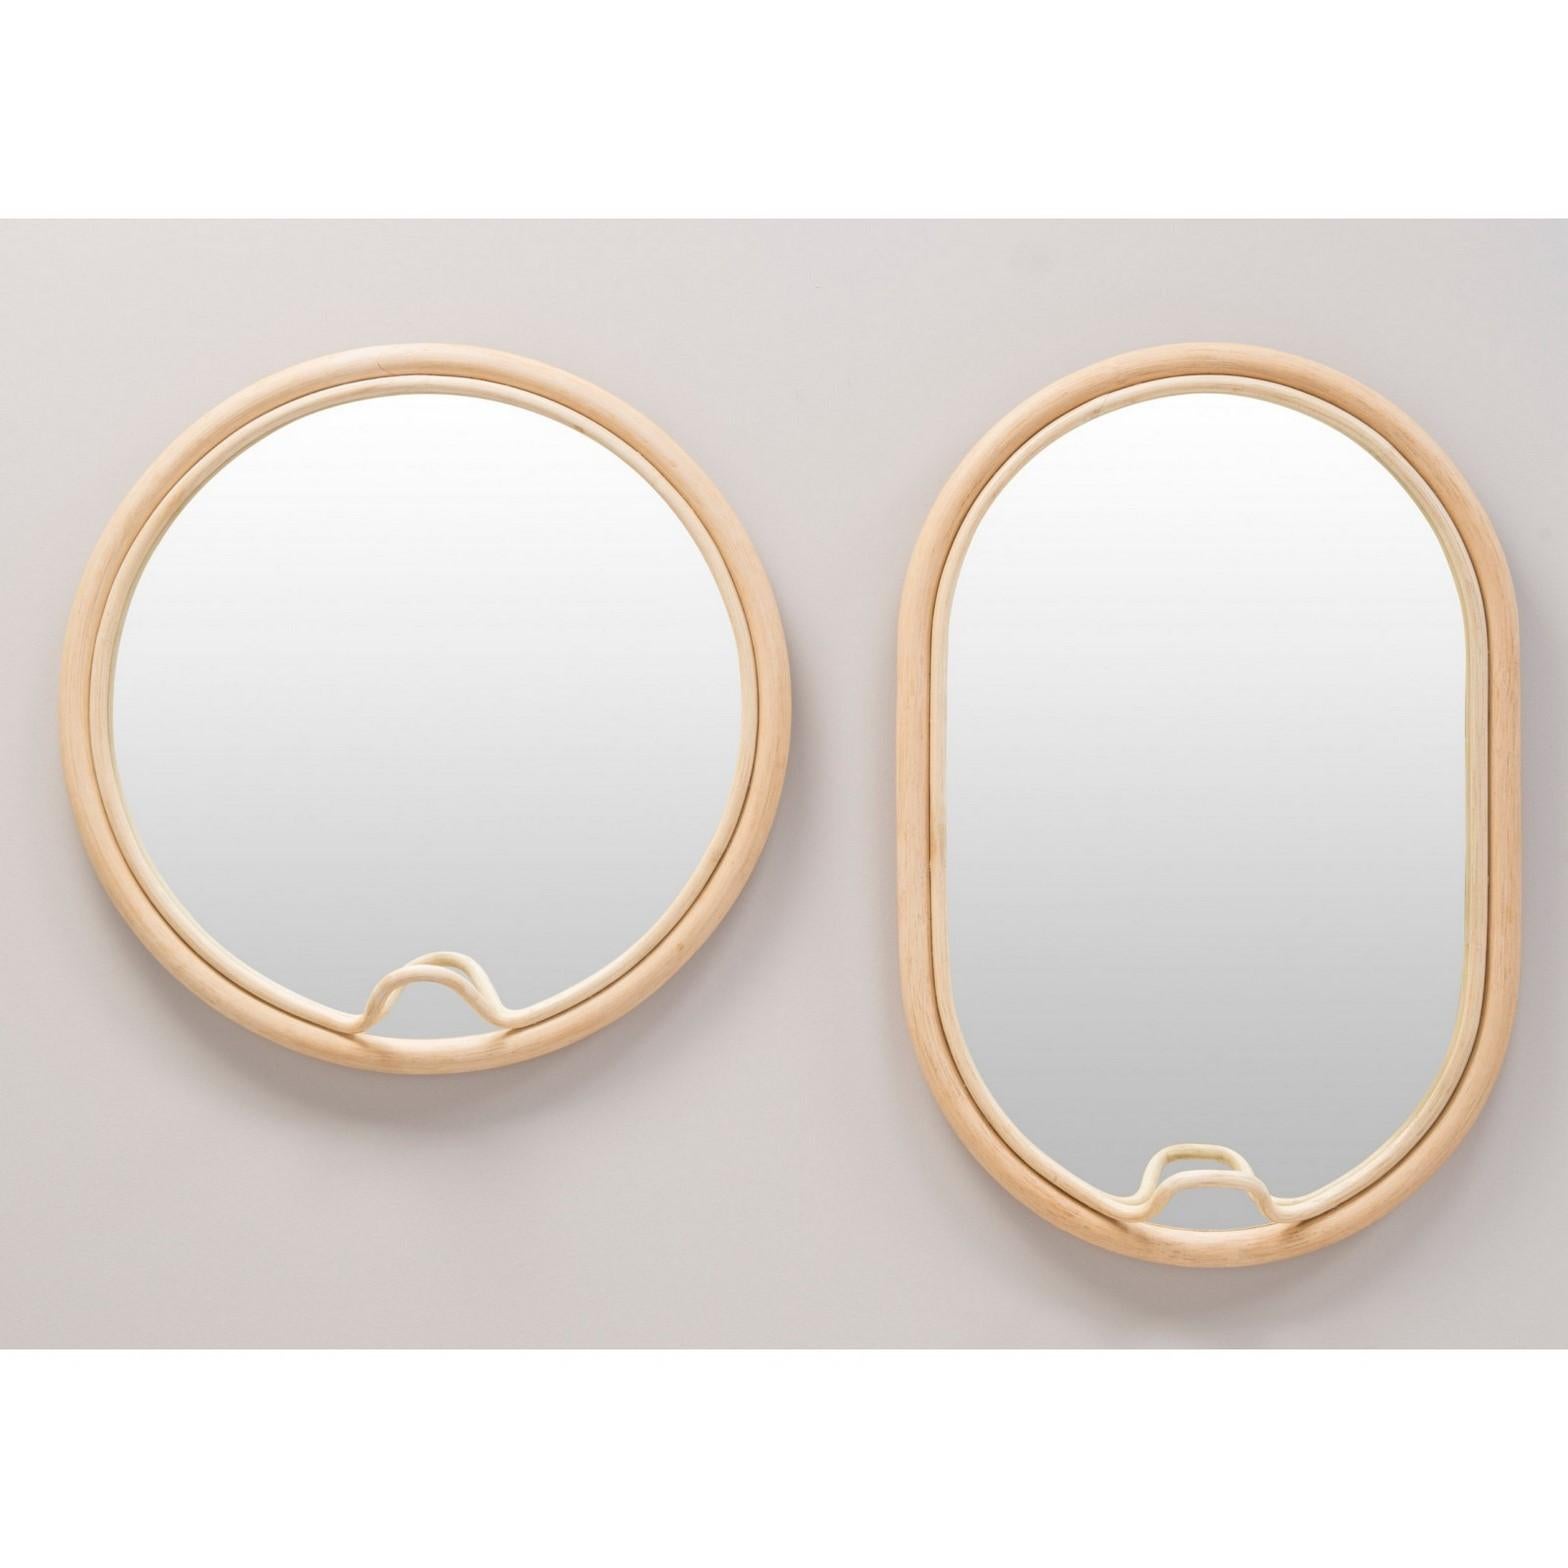 Hand-Crafted Handcrafted French Design Rattan Oval Mirror